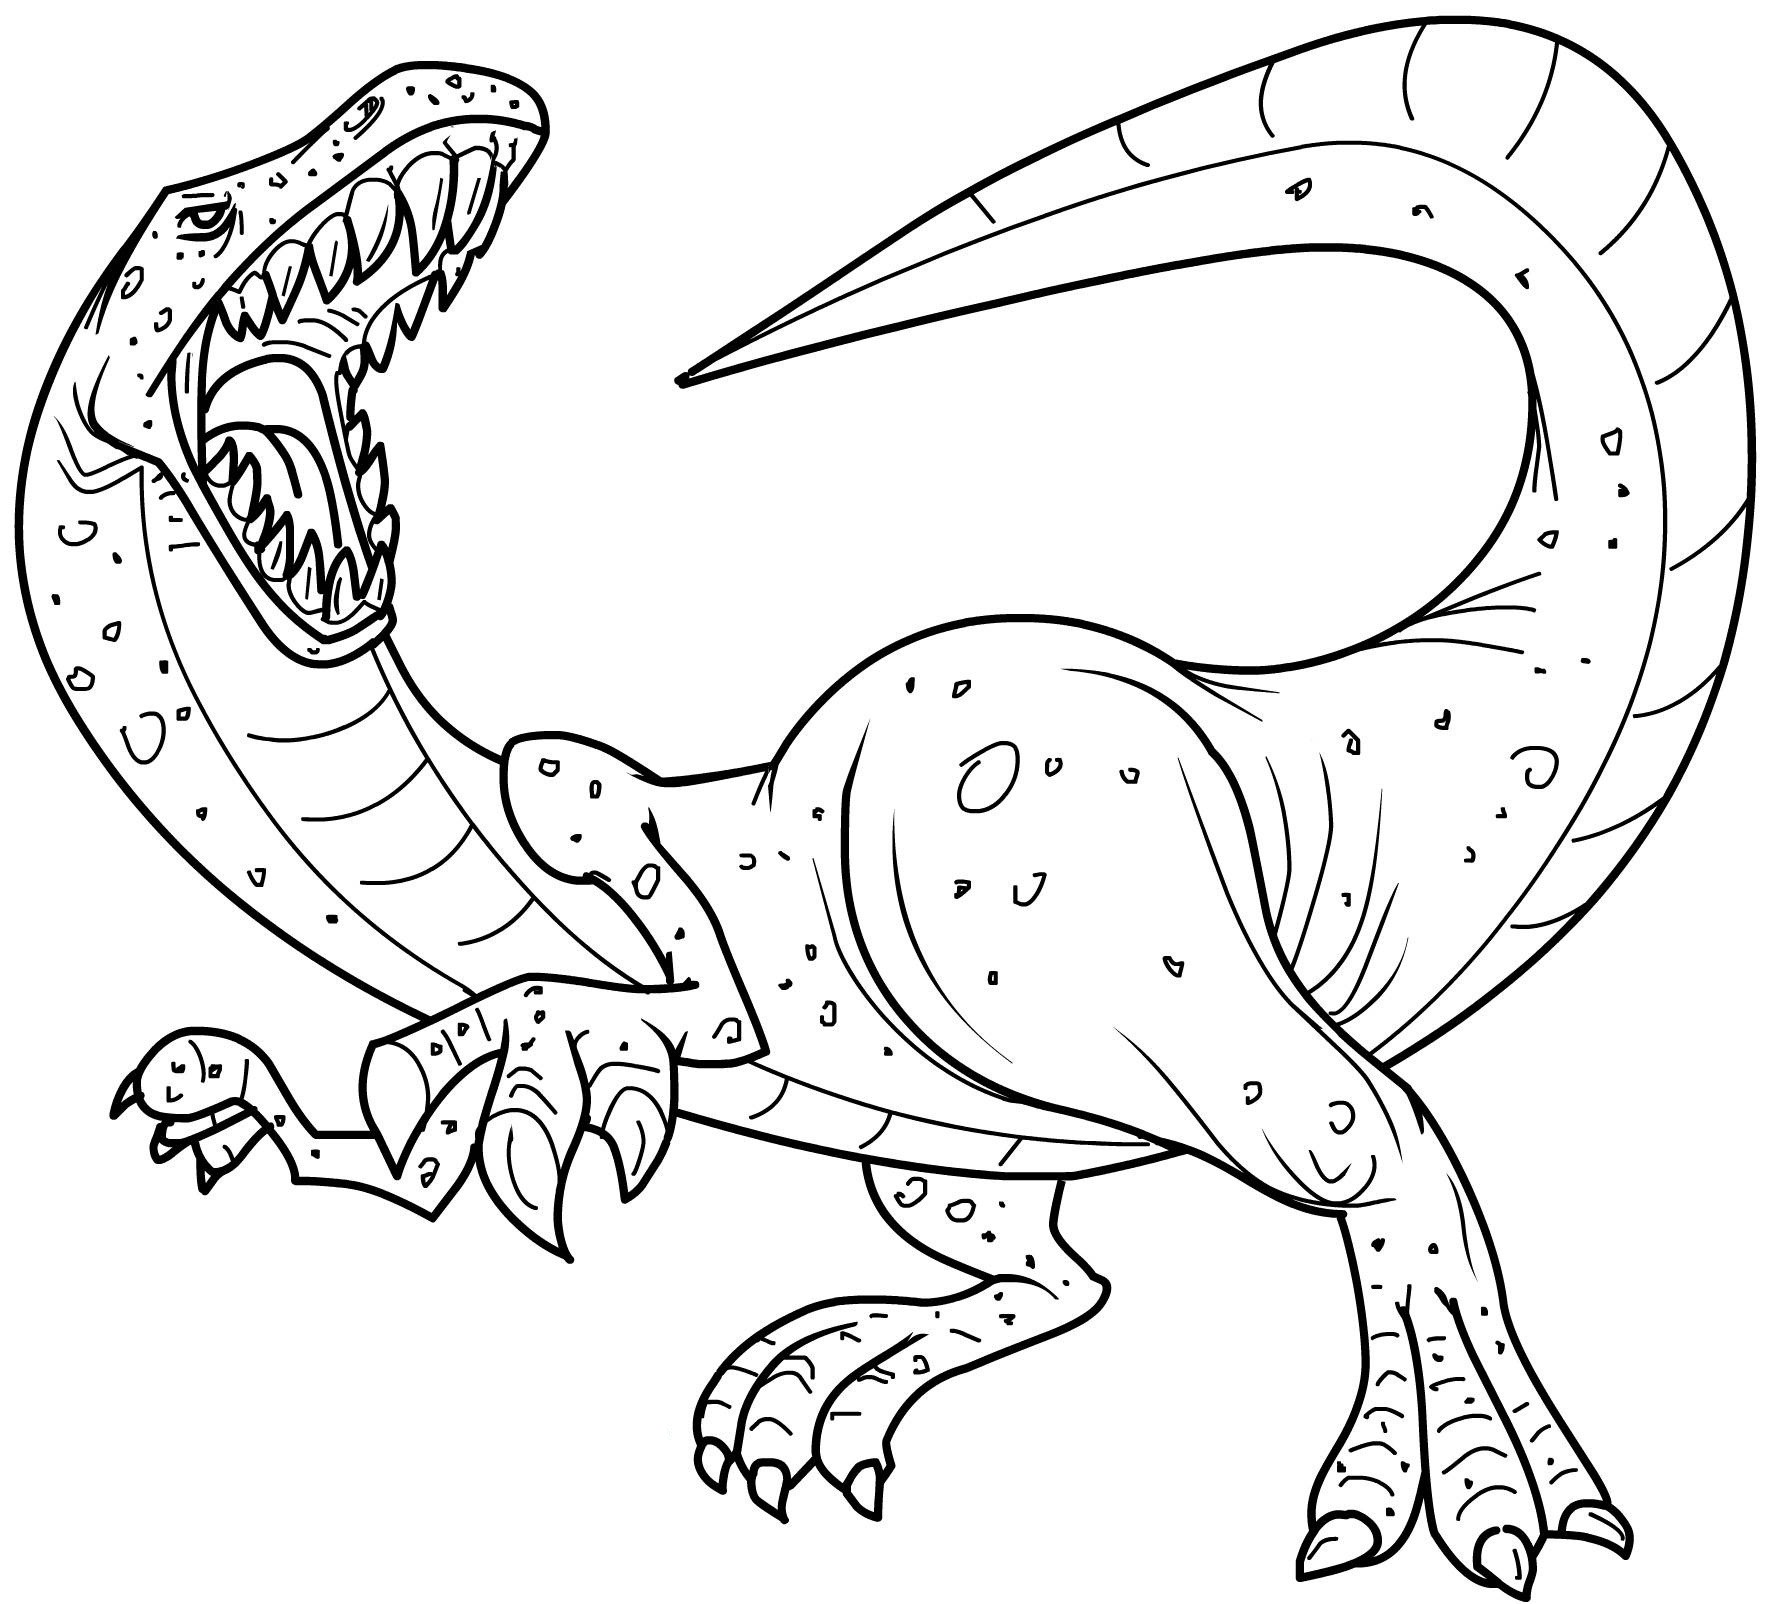 Featured image of post Free Printable Dinosaur Coloring Pages With Names / Search images from huge database containing over 620,000 coloring we have collected 40+ dinosaur coloring page with names images of various designs for you to color.